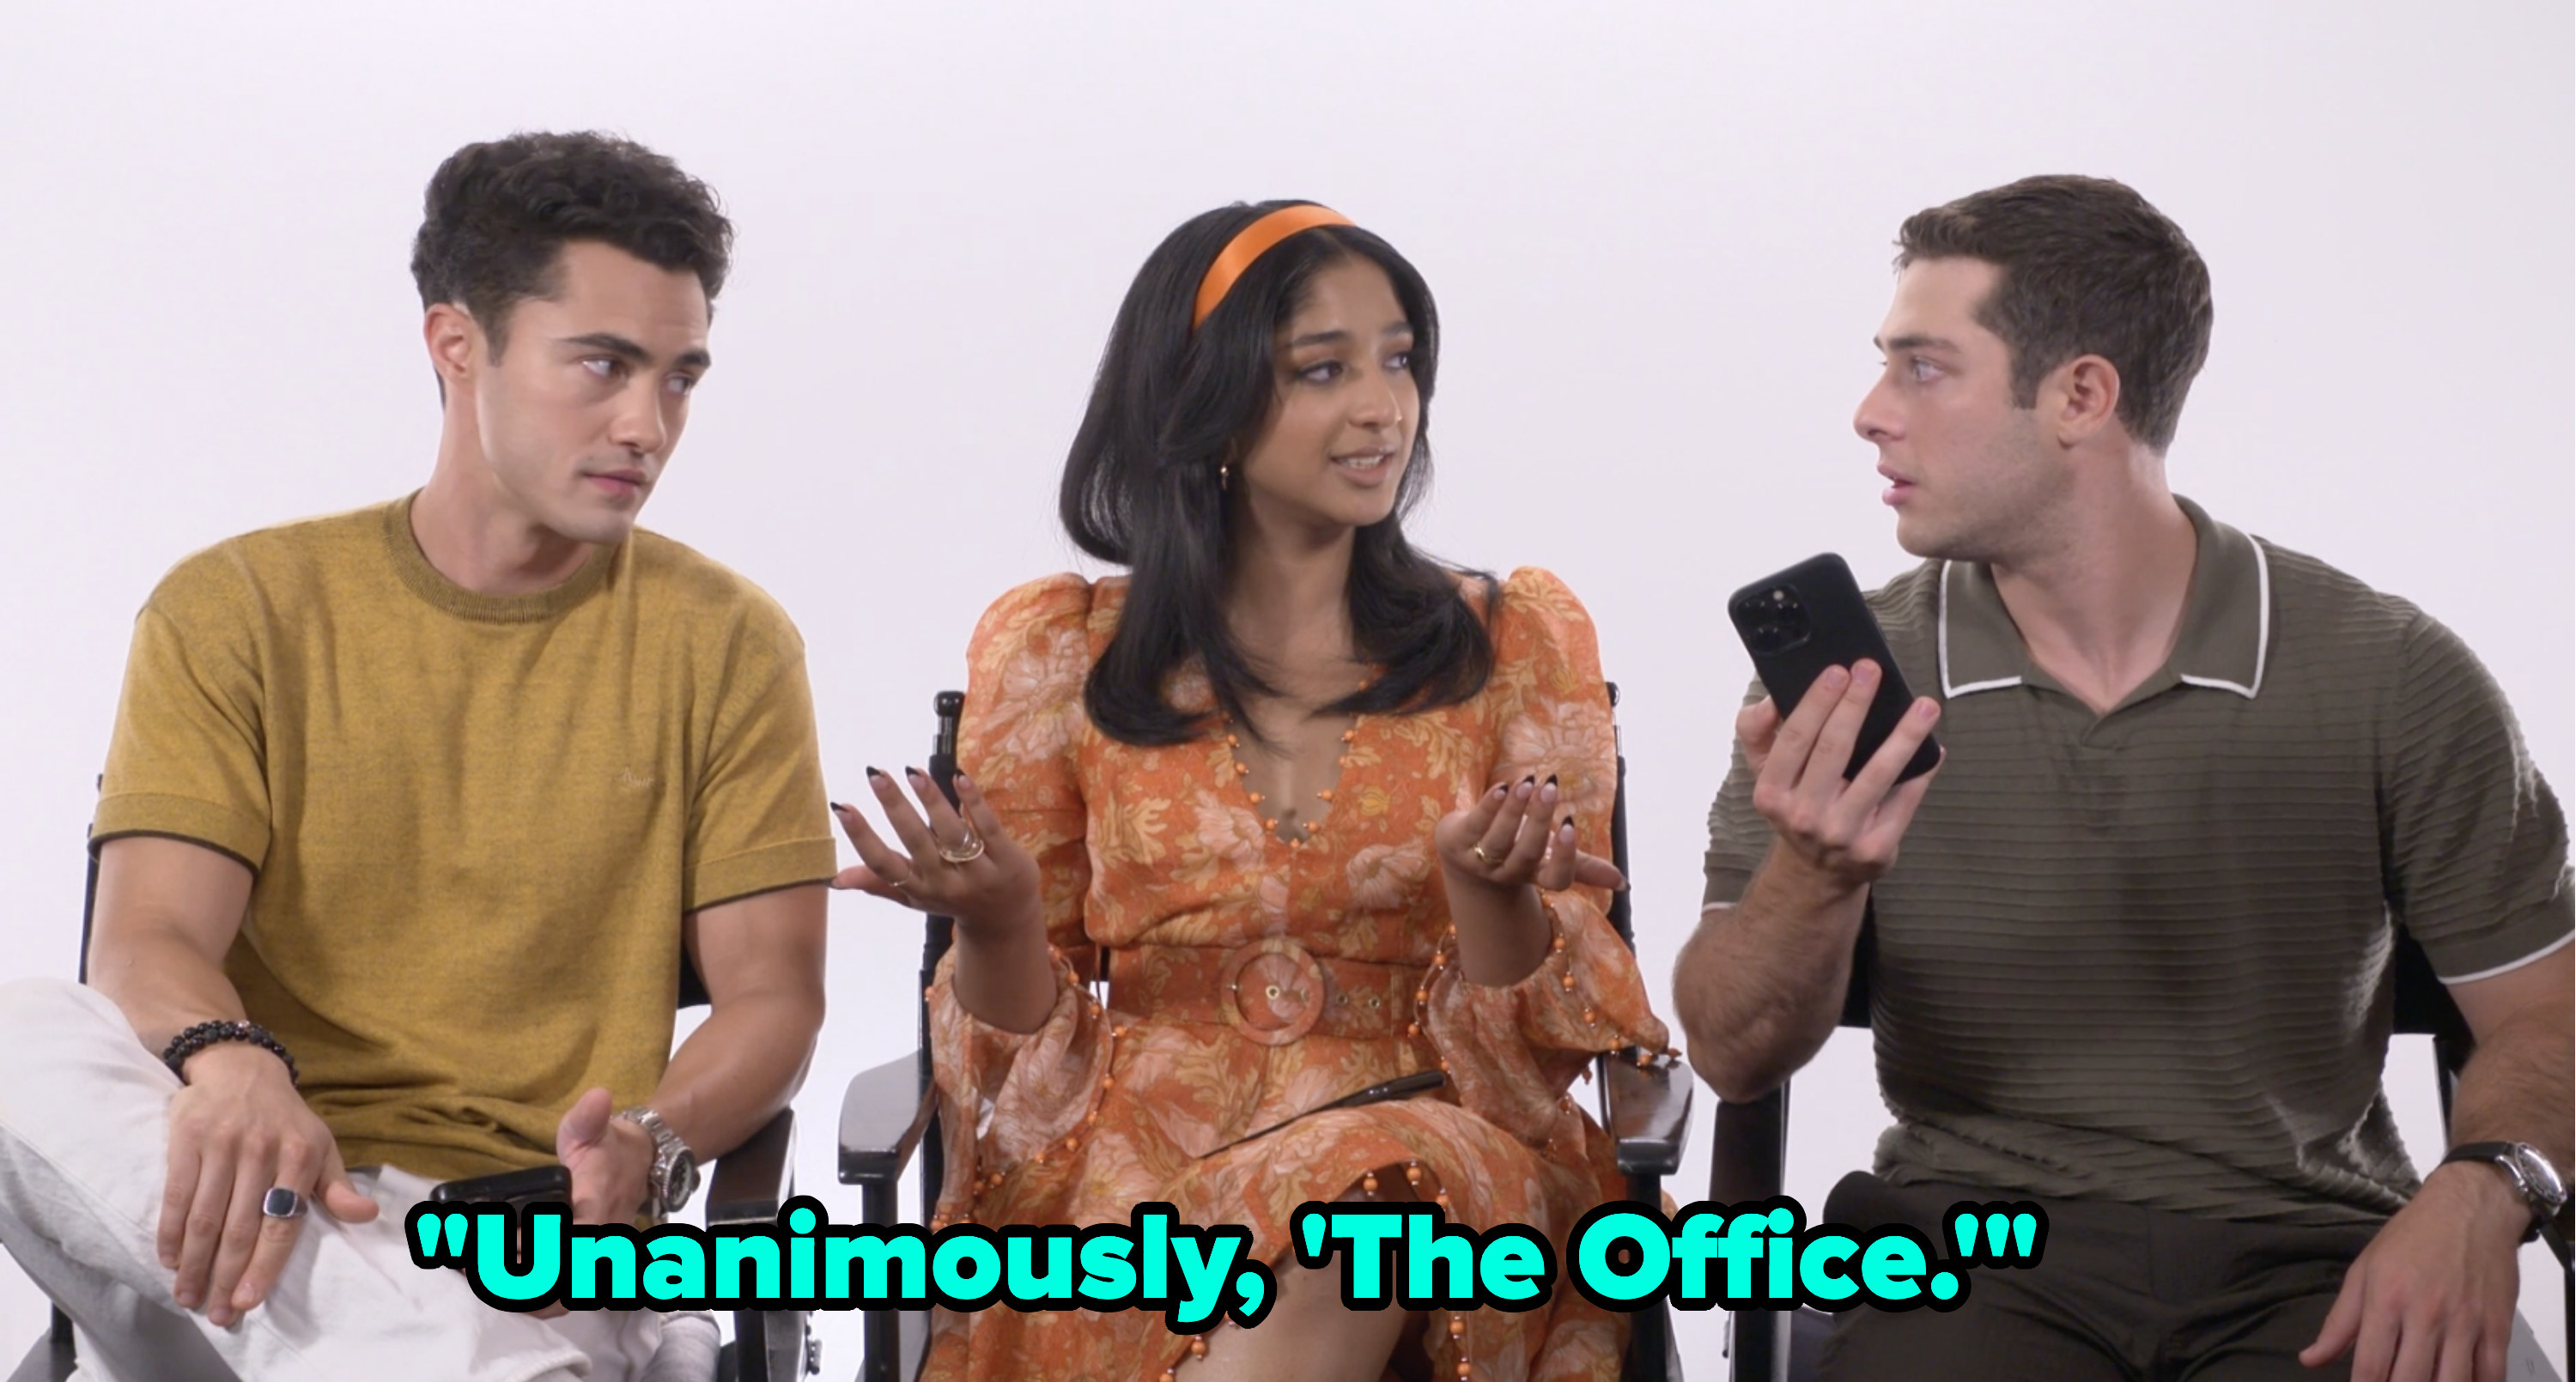 the three actors looking at each other with the words, &quot;Unanimously, &#x27;The Office&#x27;&quot;